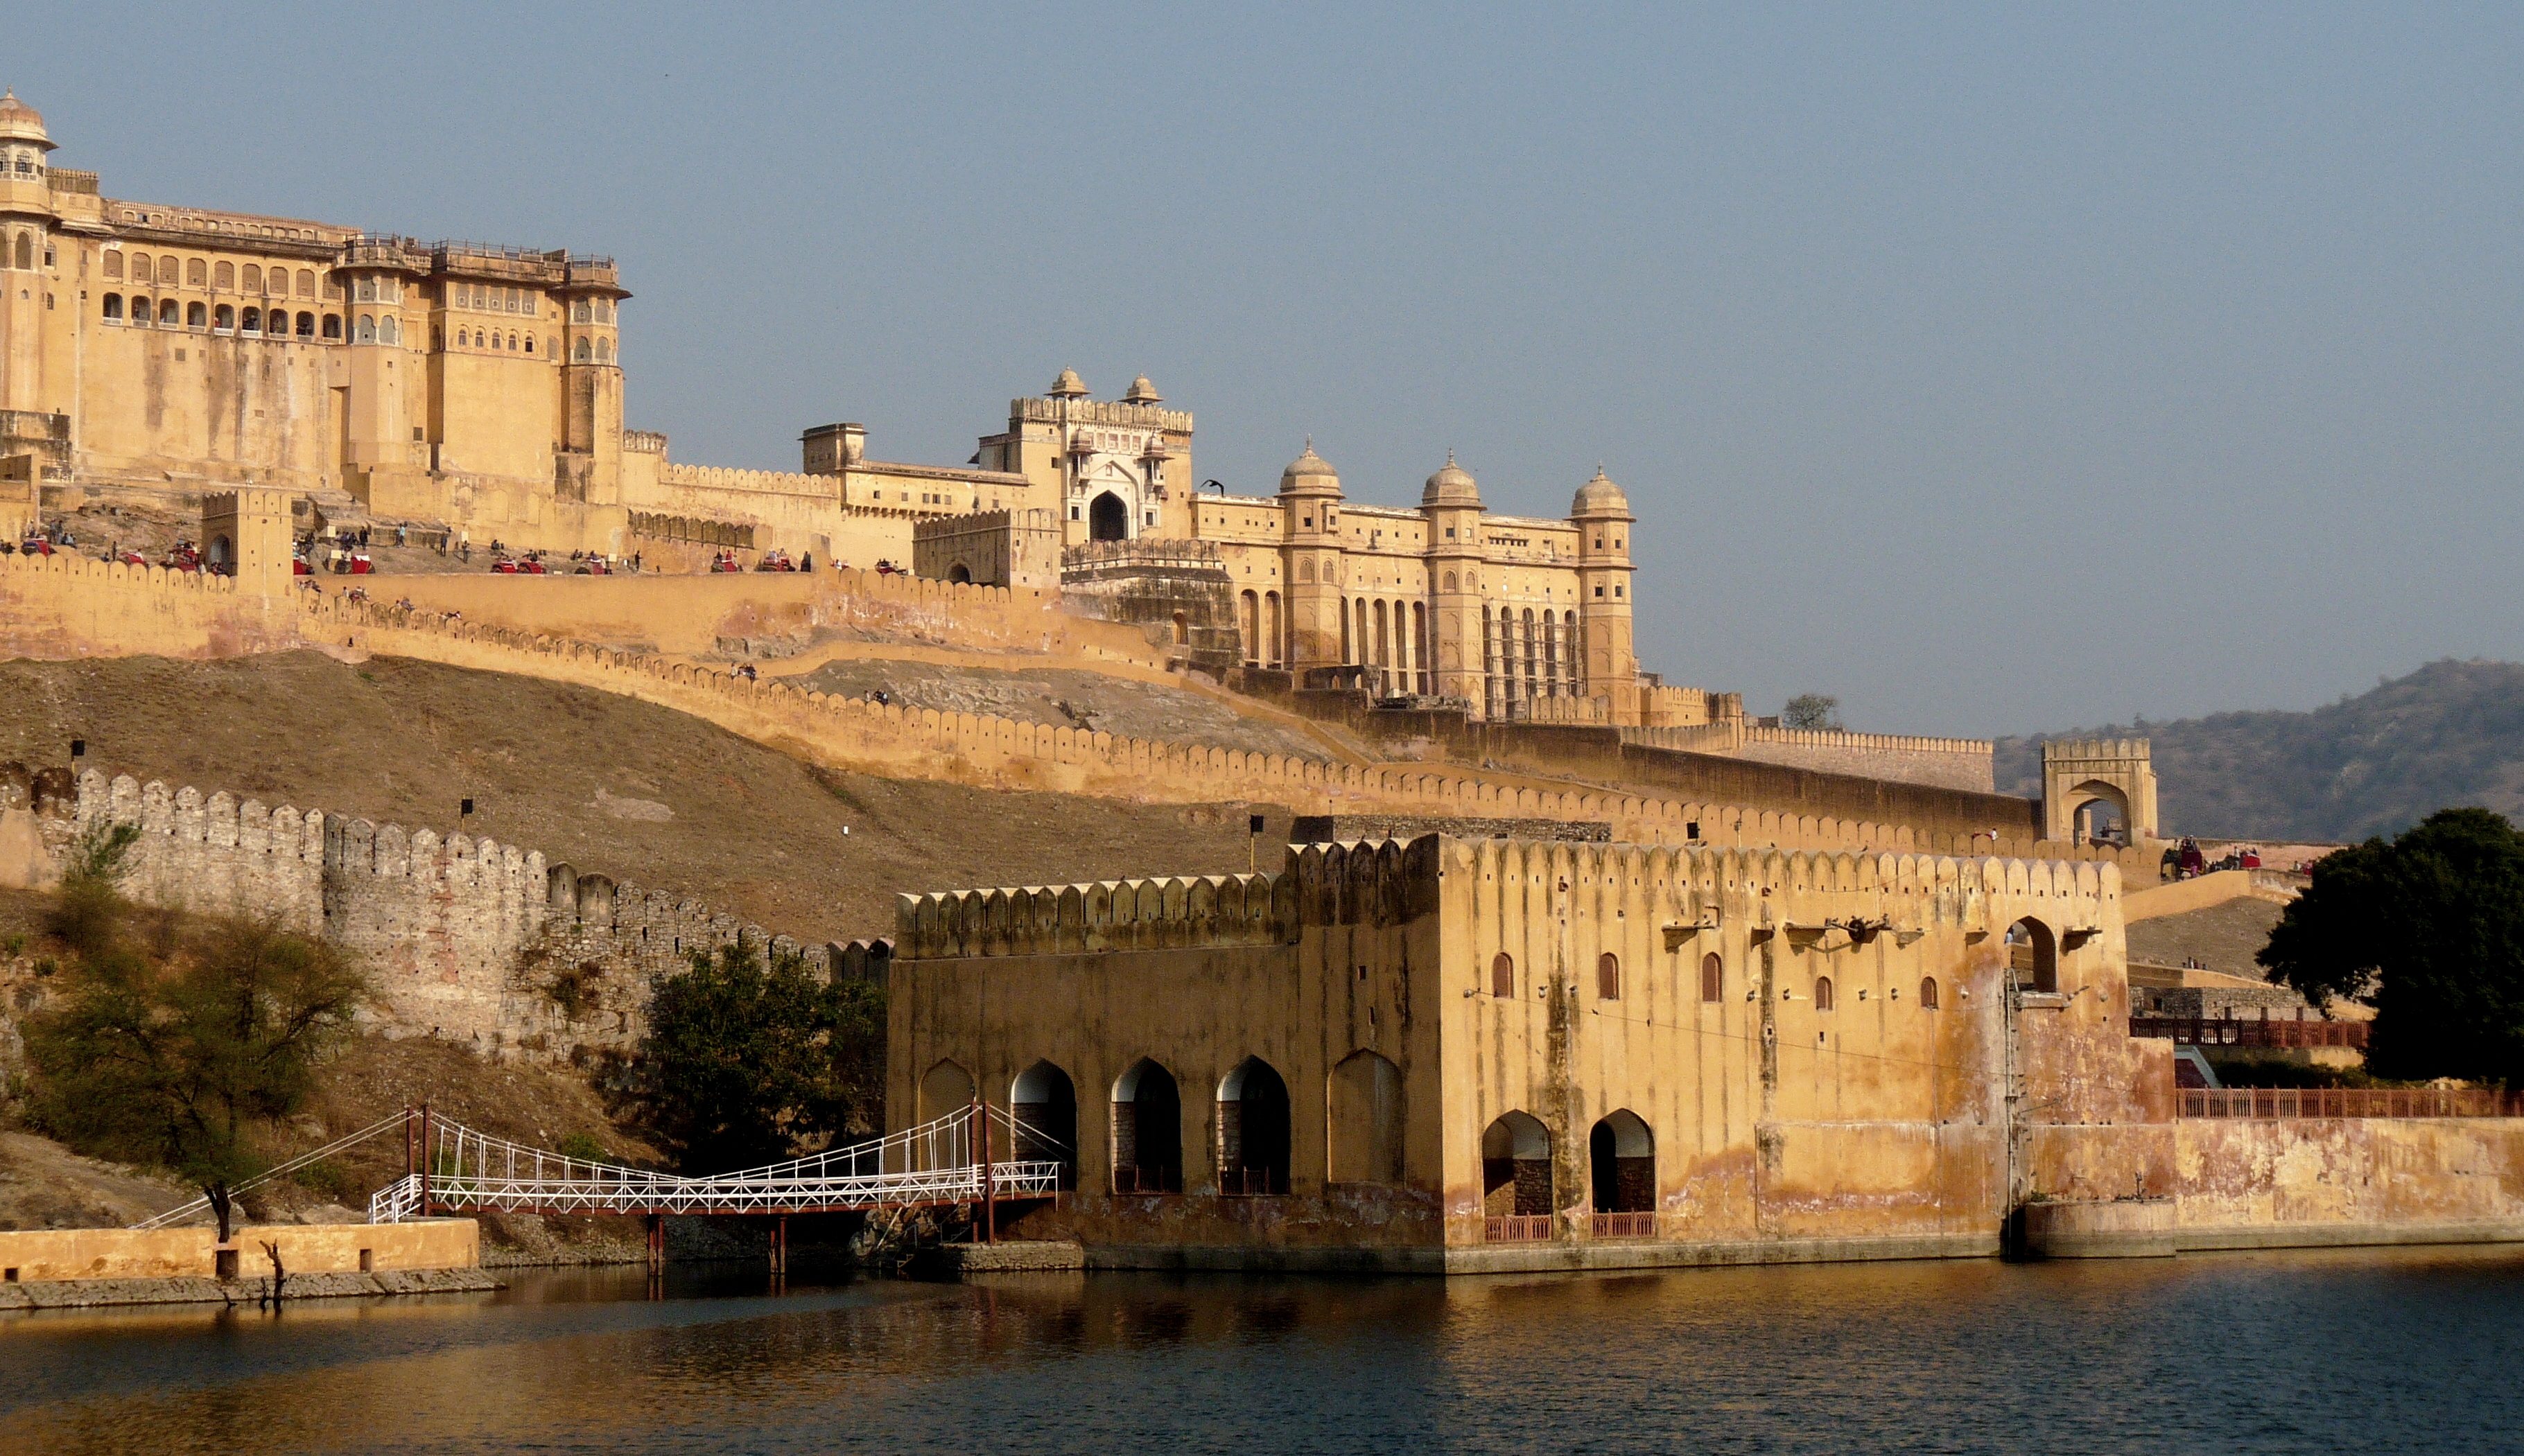 Amer Fort - The Best of Indian Internet